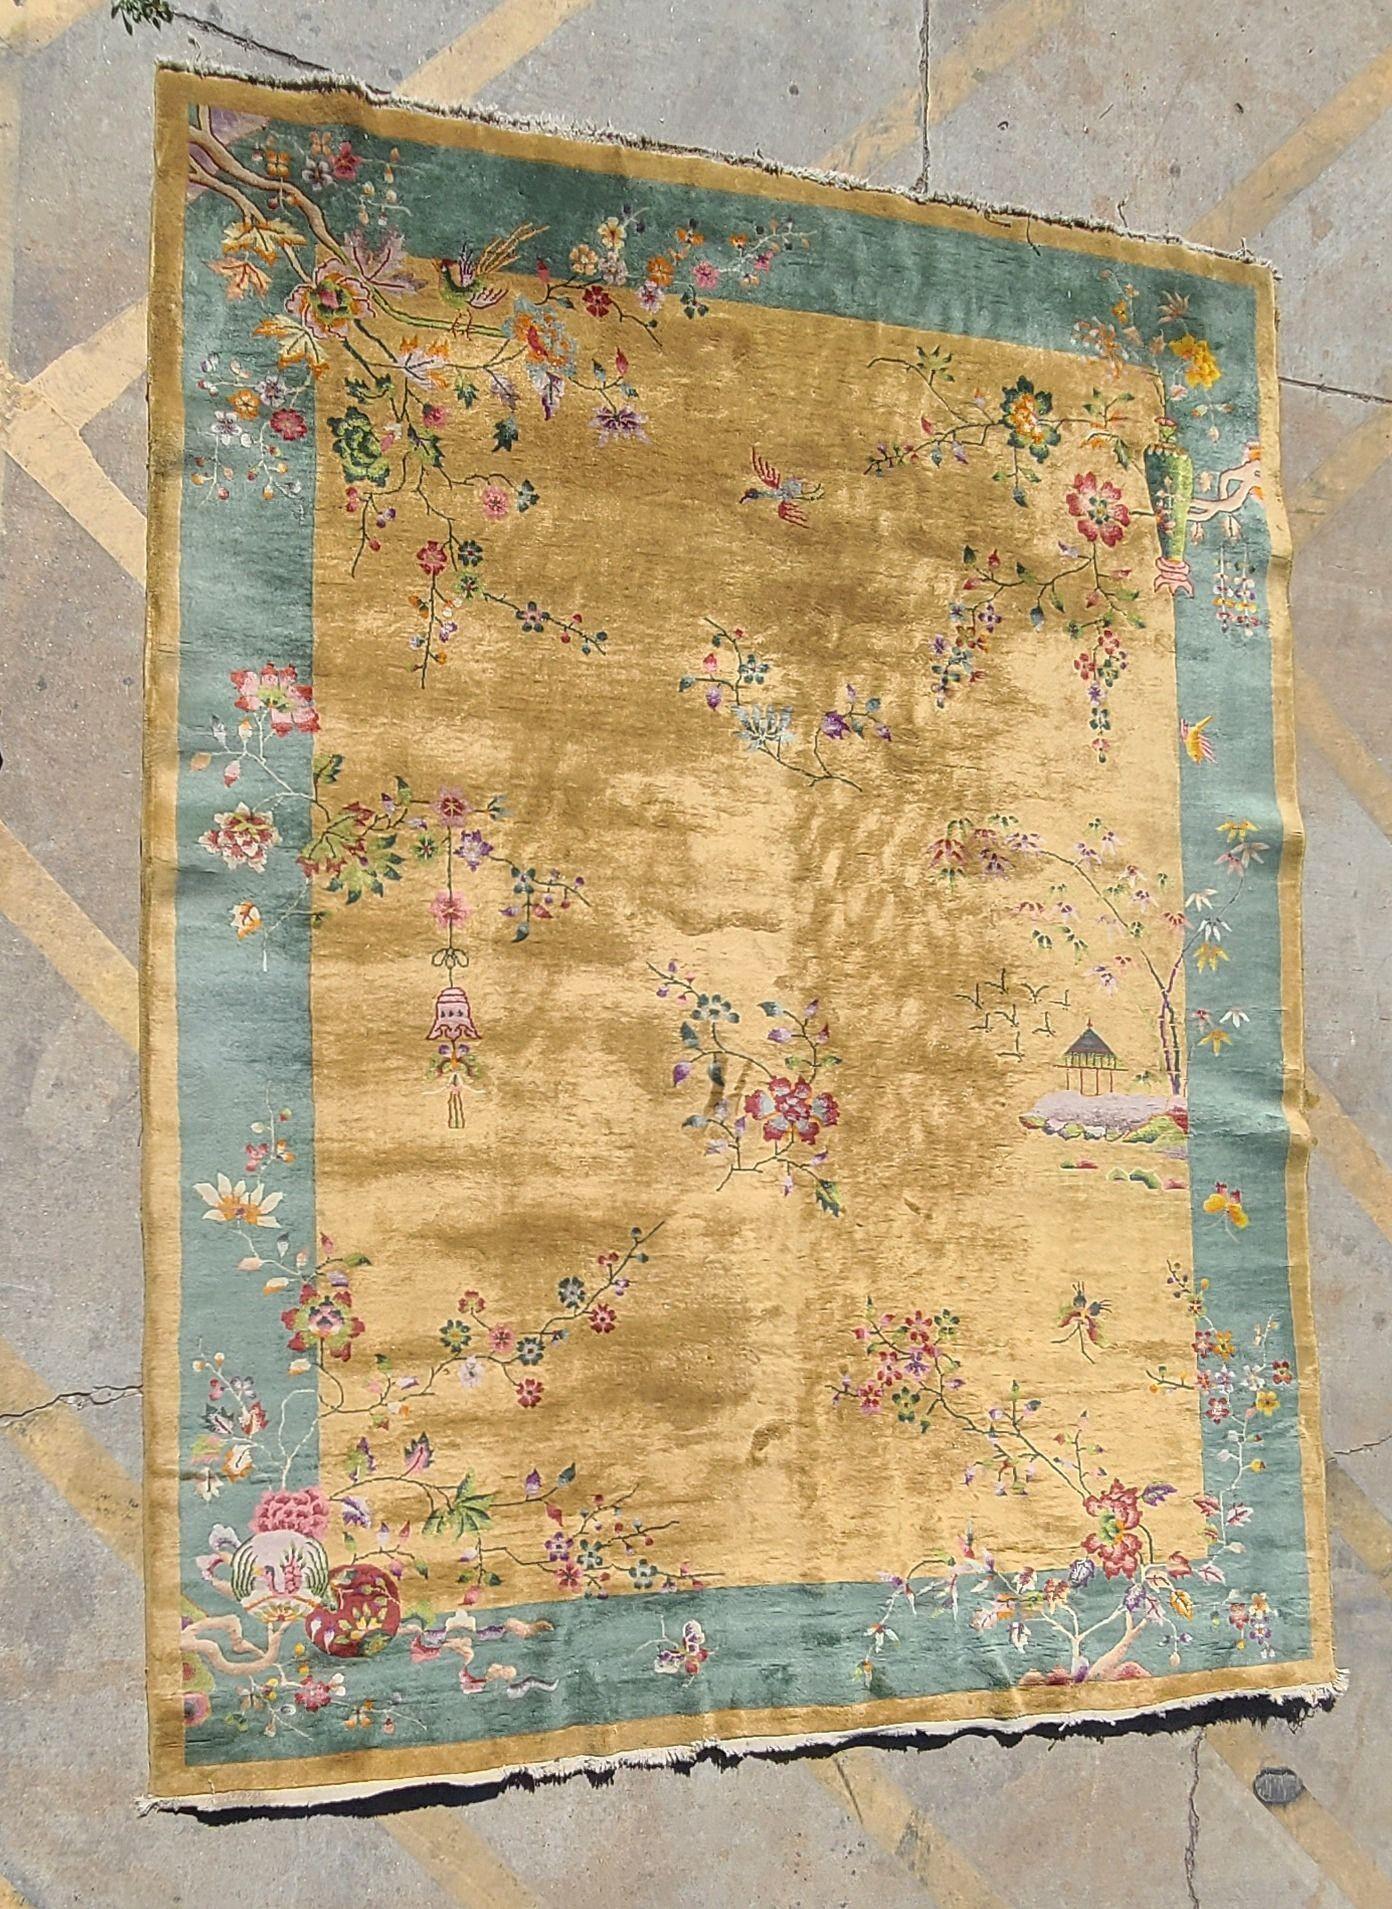 Large Wool on cotton Art Deco era Nichols-style Chinese area rug with Blue and gold border decorated with pagoda structures, boats/water, and floral motifs on a gold field centering floral.

Measurements: 11.5' X 9'

Circa 1930, China